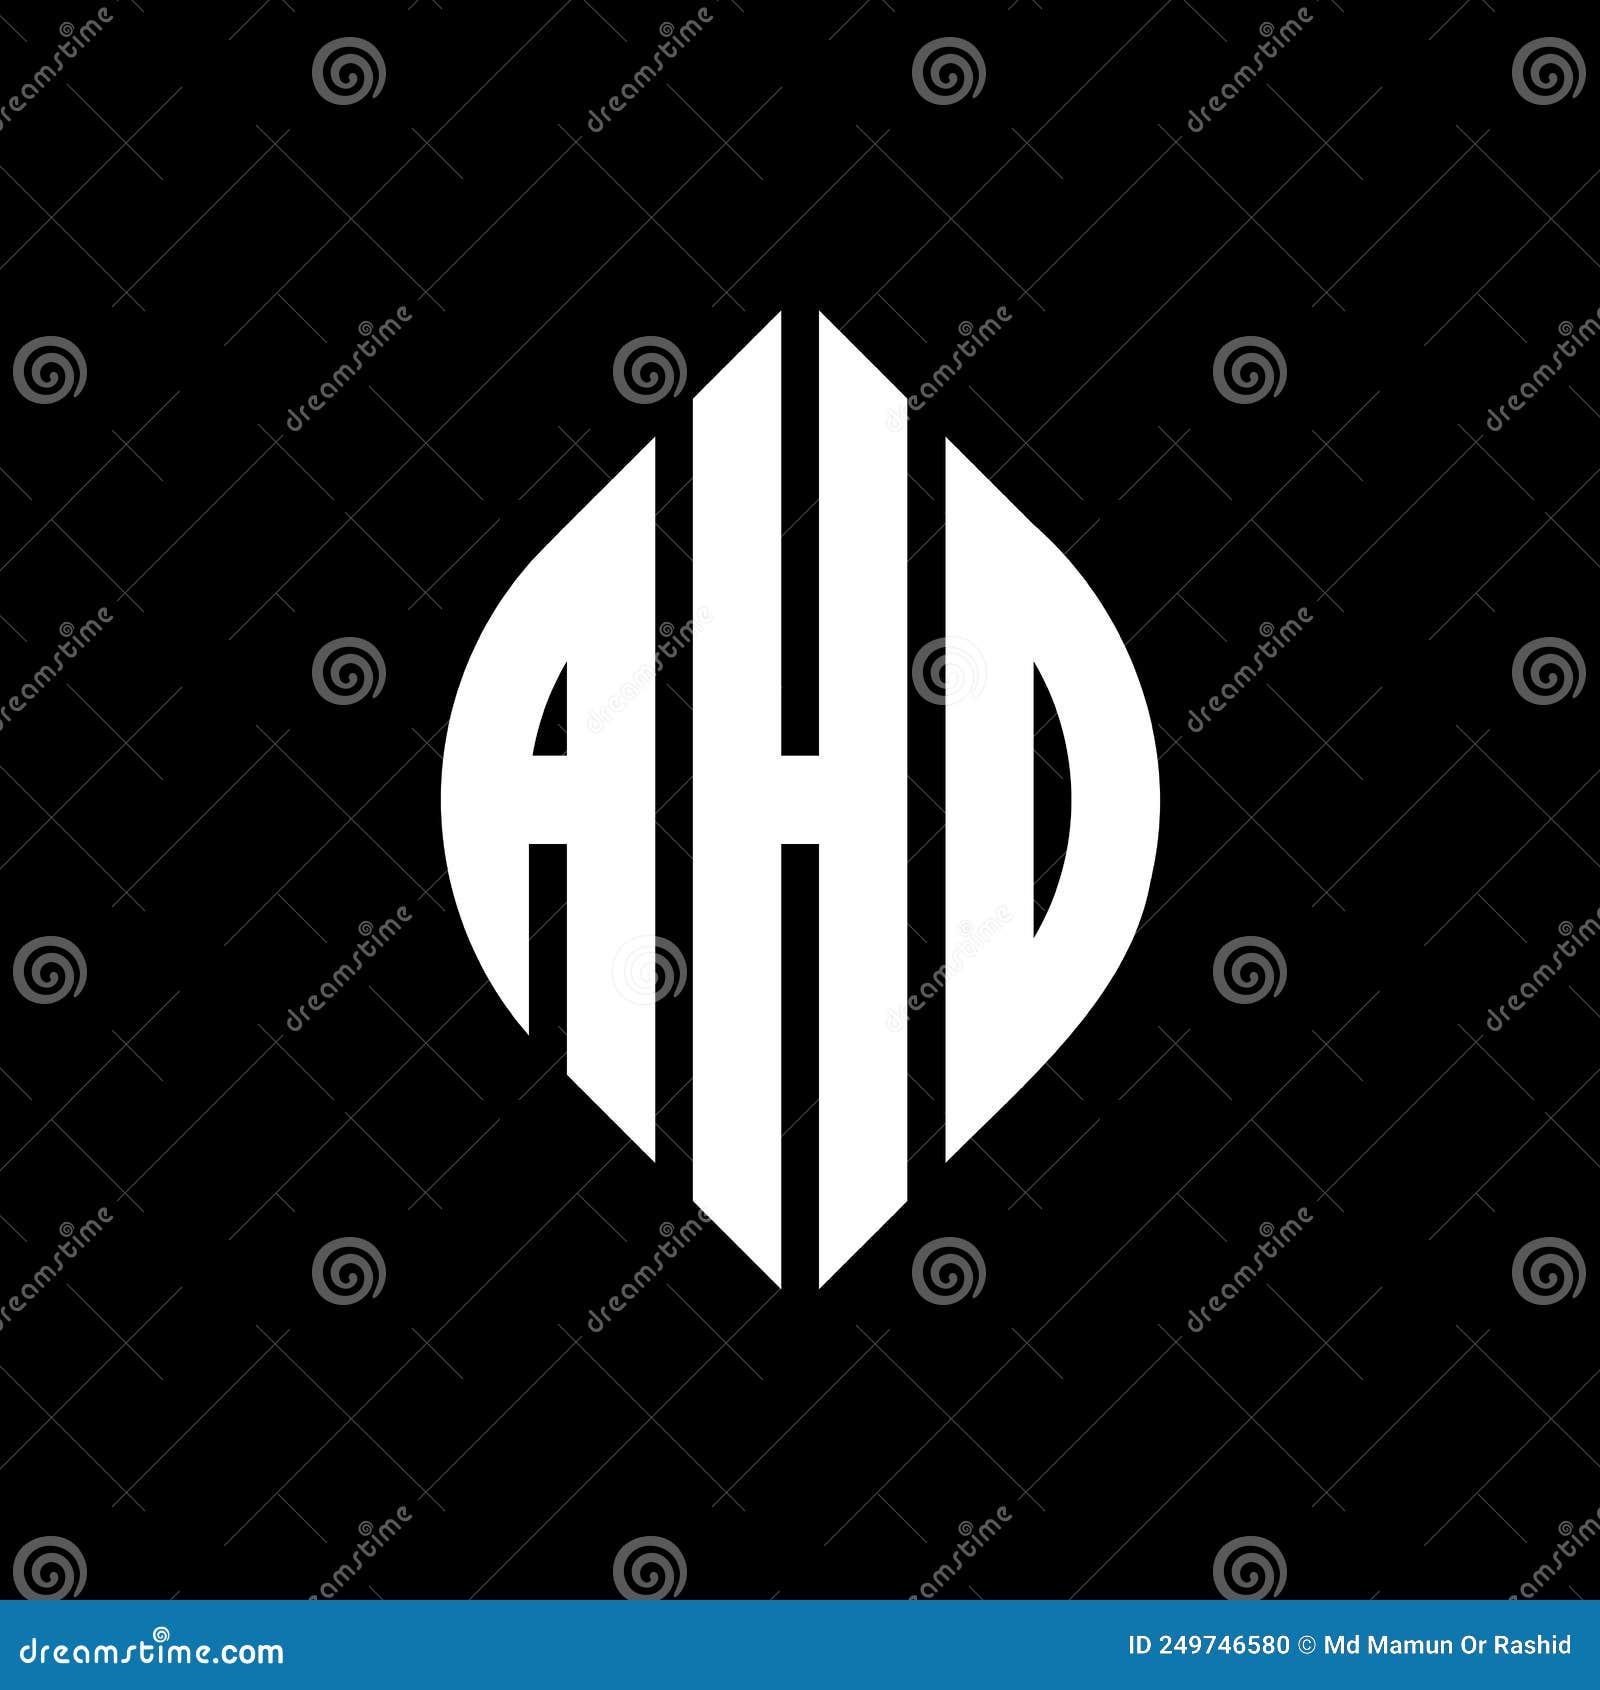 aho circle letter logo  with circle and ellipse . aho ellipse letters with typographic style. the three initials form a